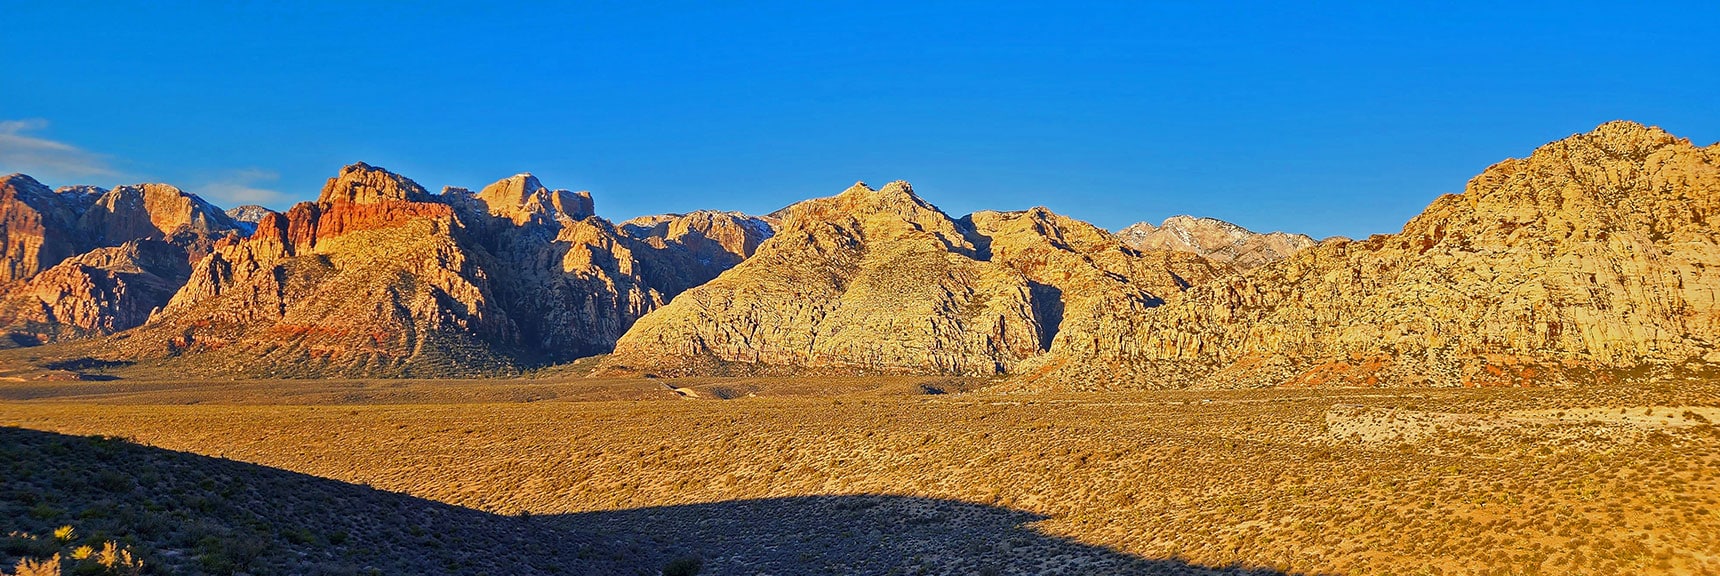 Big Picture View of SMYC Trail Between Ice Box Canyon and White Rock Mountain | SMYC Trail | Red Rock Canyon National Conservation Area, Nevada | David Smith | LasVegasAreaTrails.com